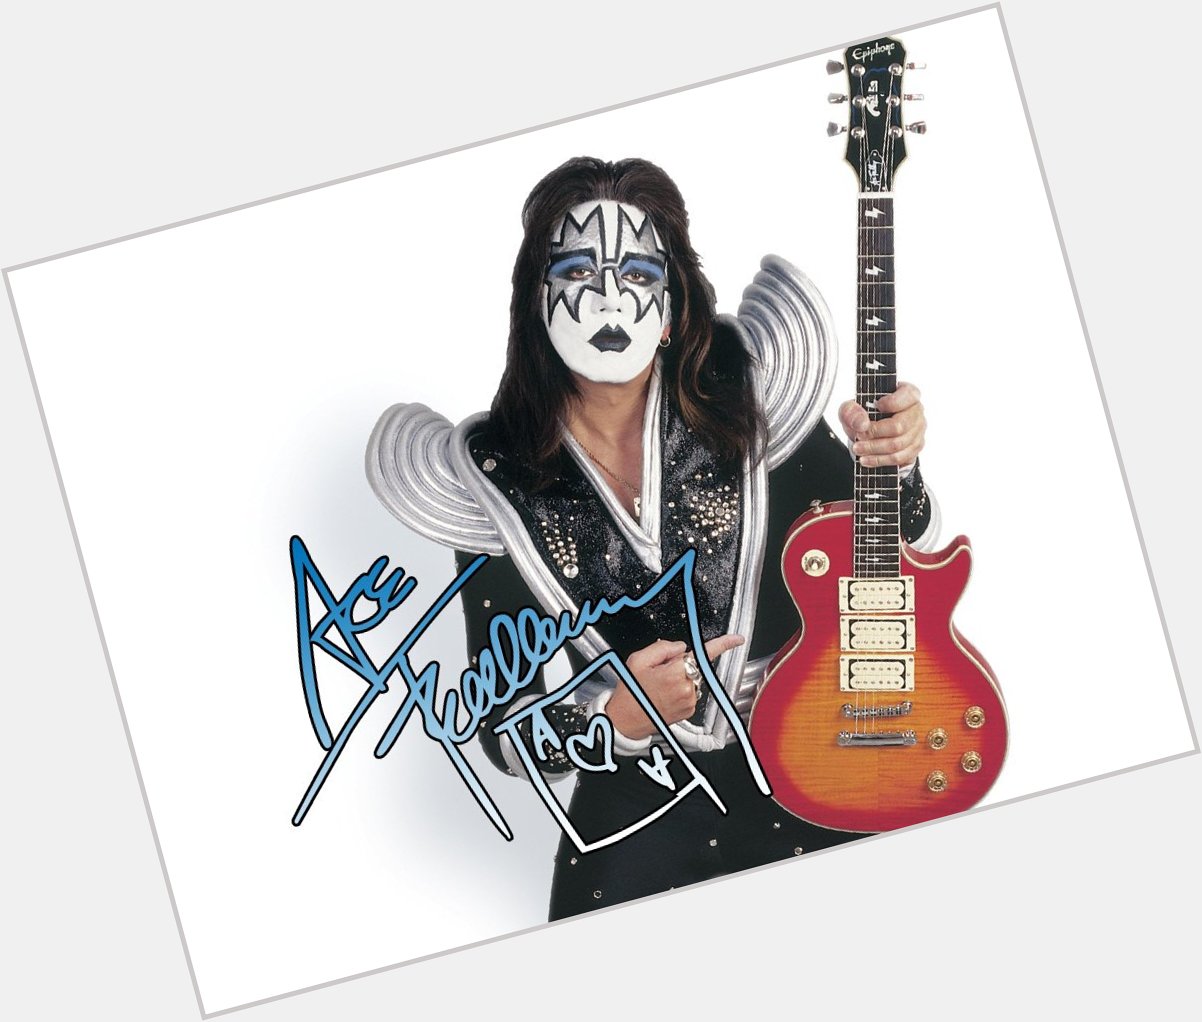 Happy Birthday to Ace Frehley who turns 66 today! 